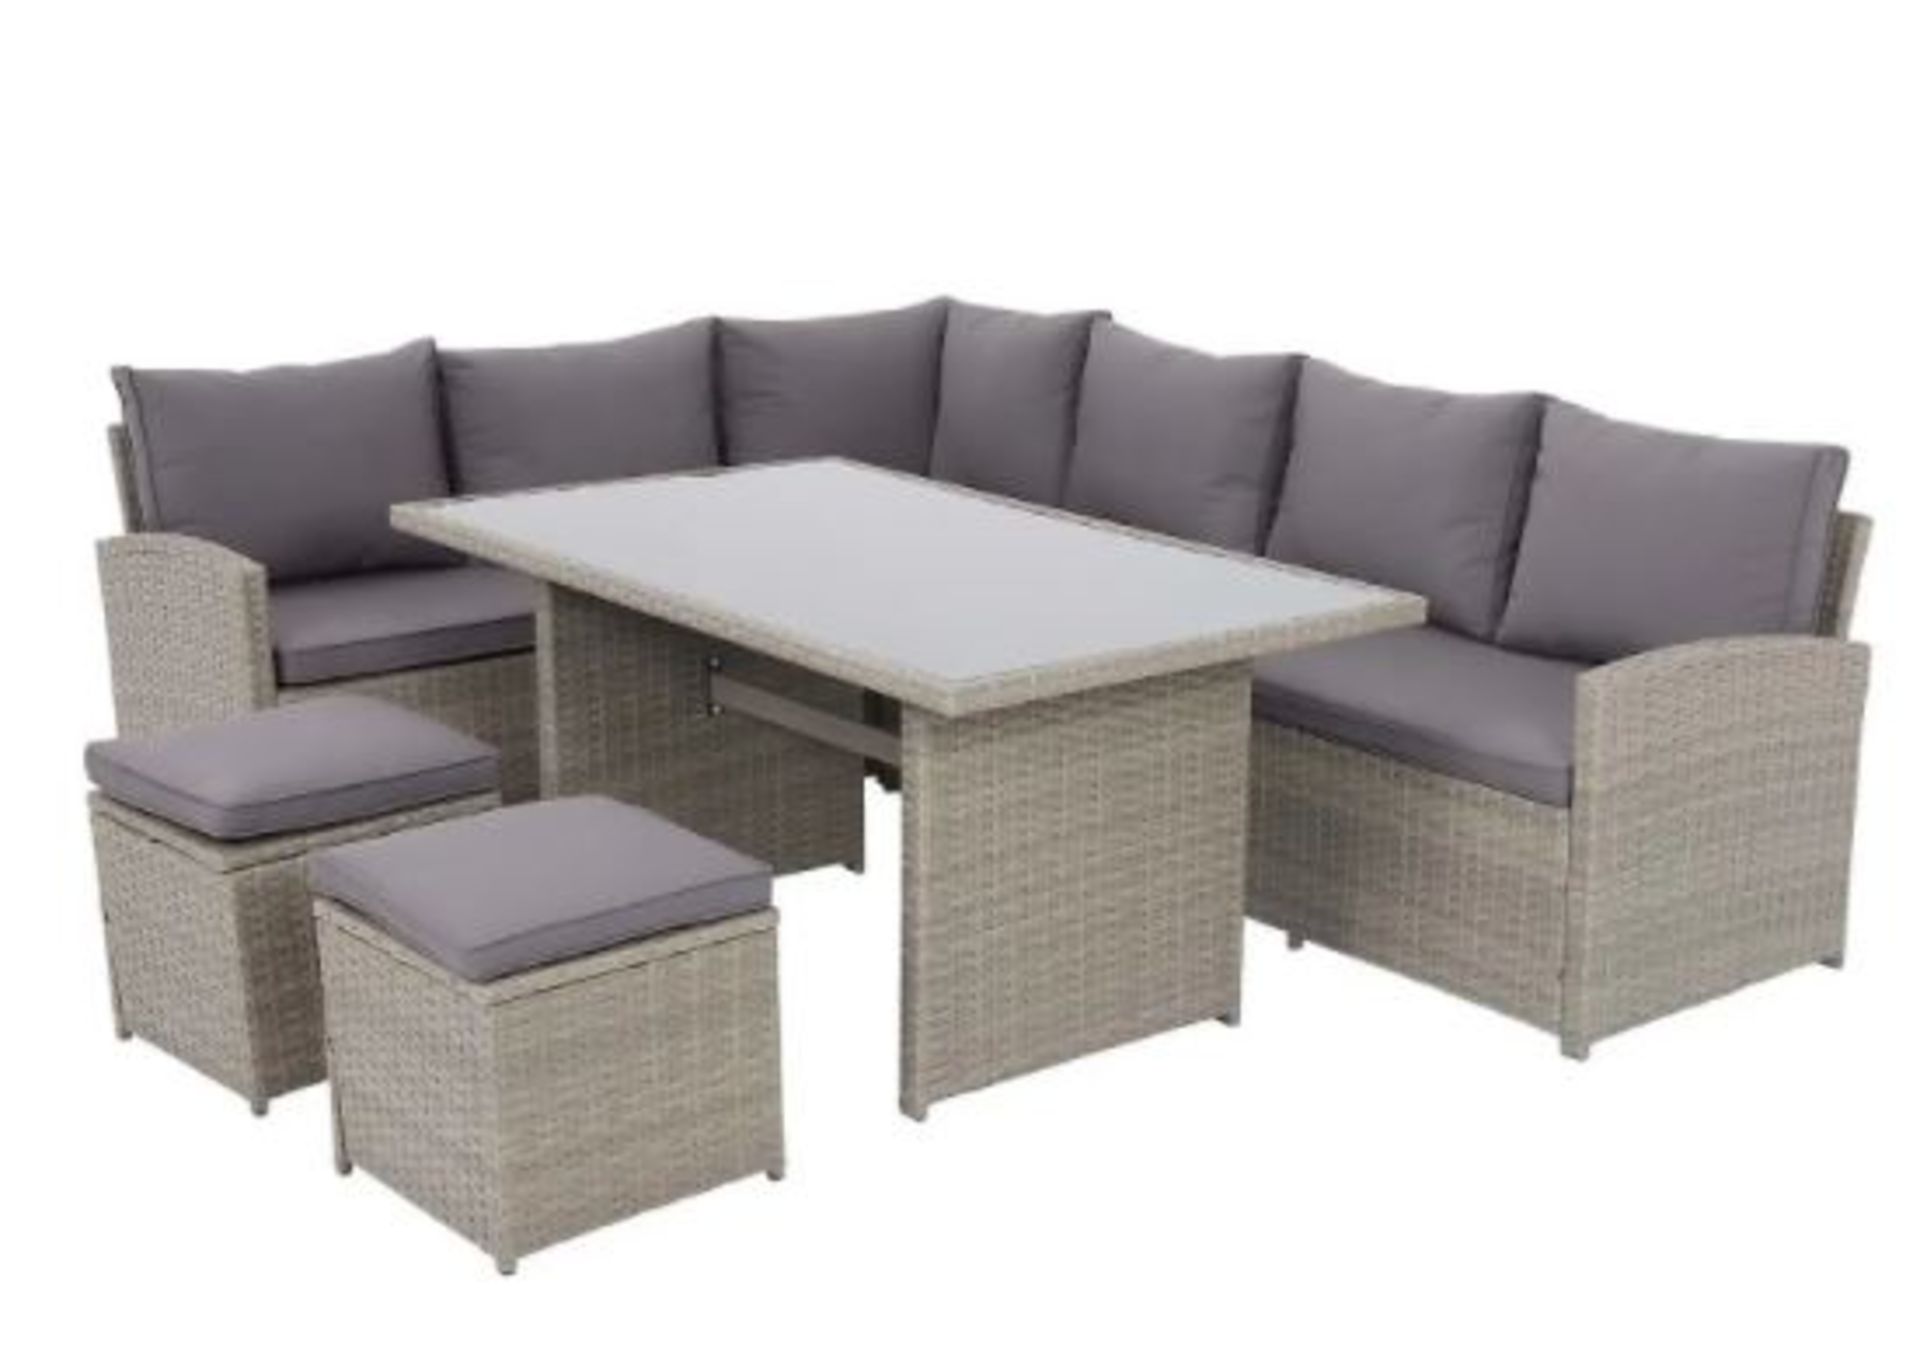 (R10K) 1x Matara Corner Sofa Dining Set (No Table Top). RRP £700 When Complete. - Image 5 of 6